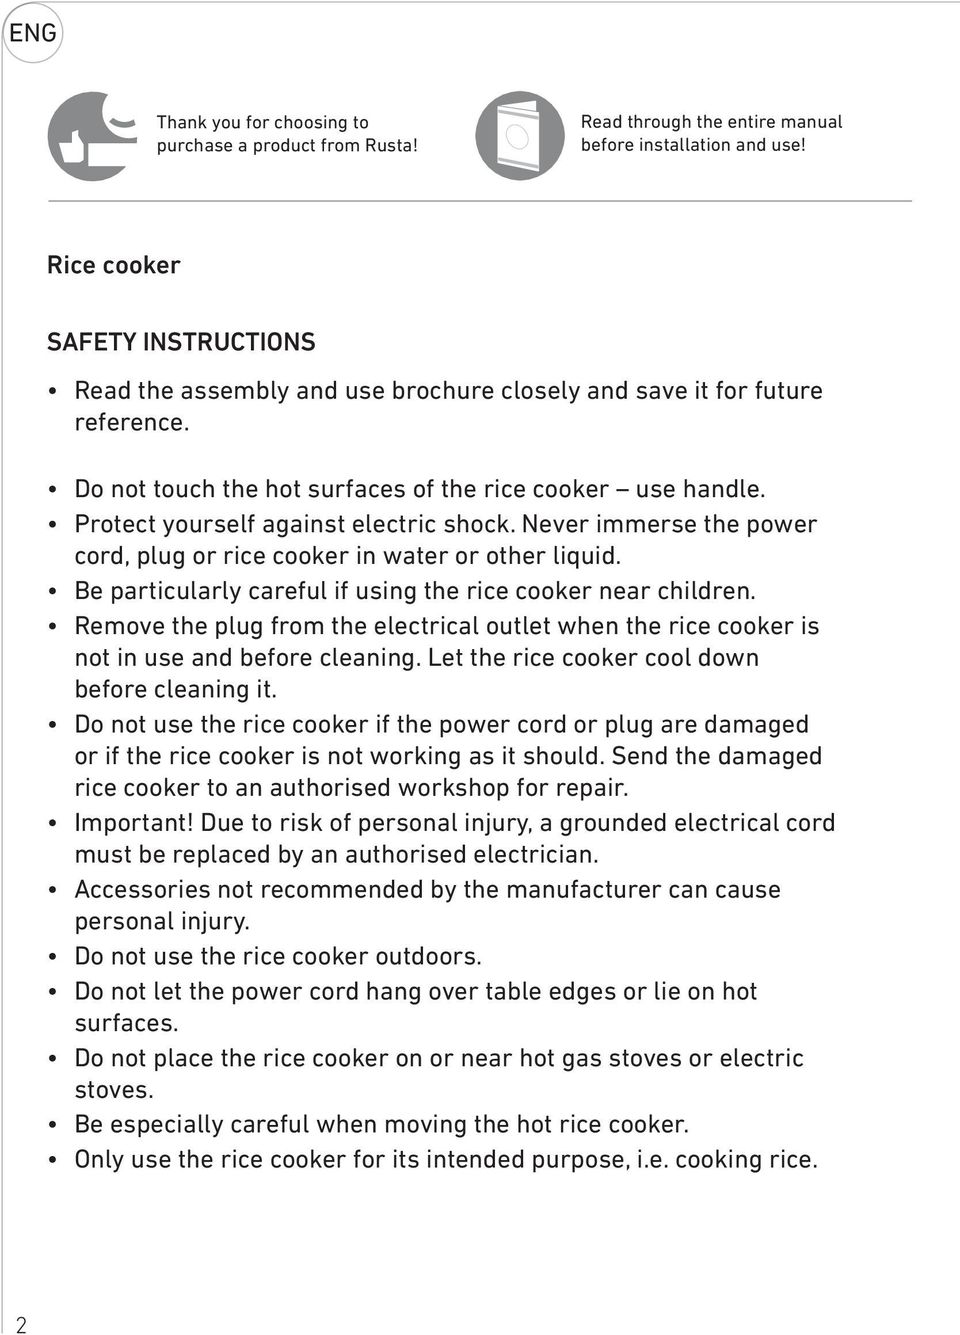 Protect yourself against electric shock. Never immerse the power cord, plug or rice cooker in water or other liquid. Be particularly careful if using the rice cooker near children.